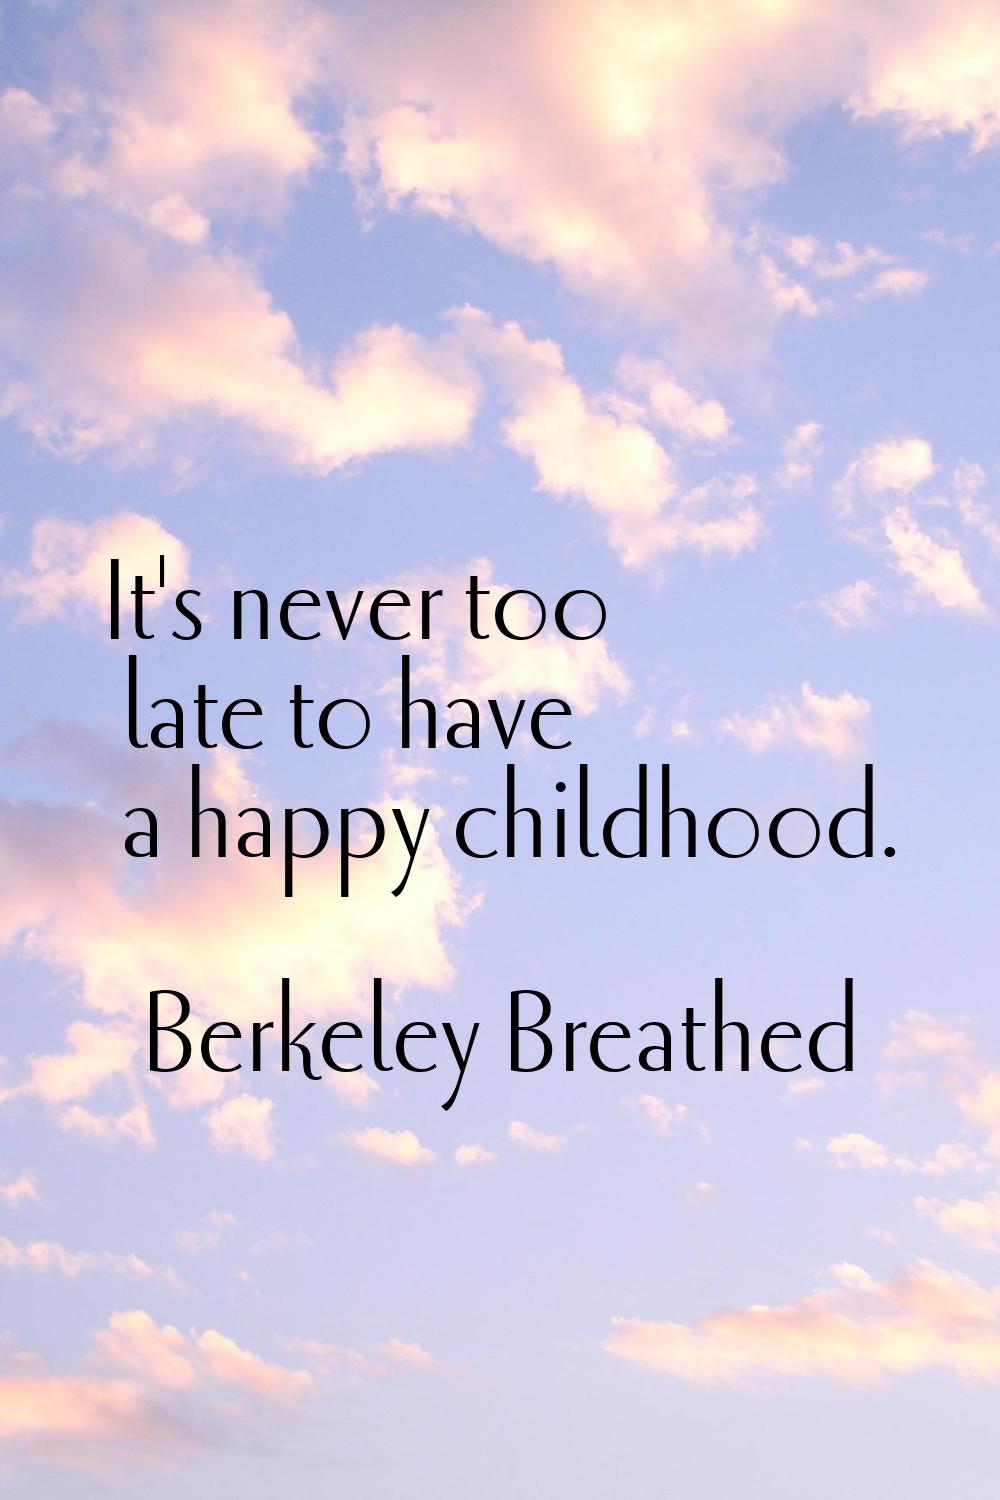 It's never too late to have a happy childhood.